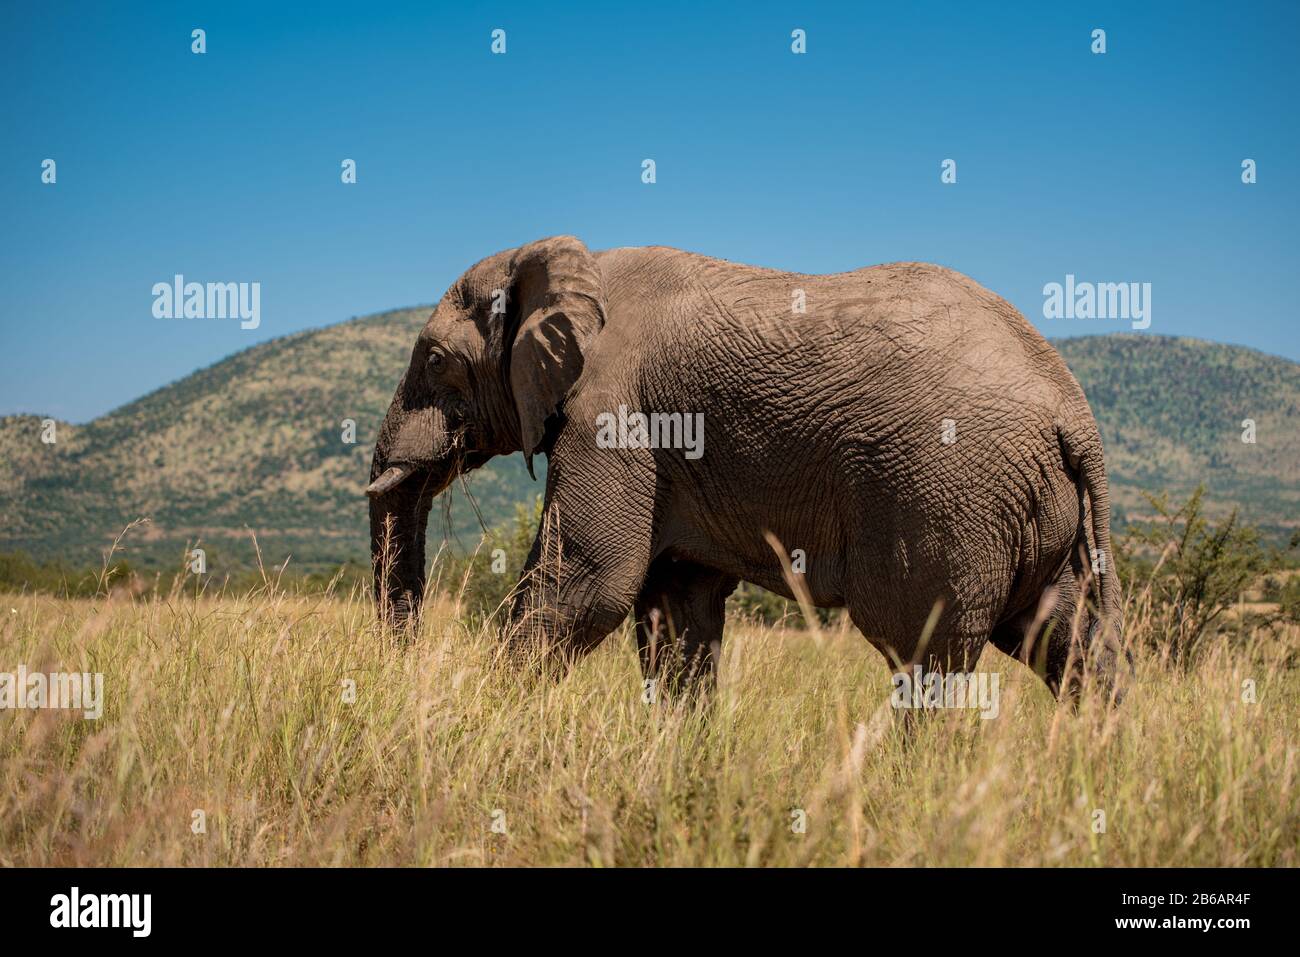 An African elephant (Loxodonta africana) walking through the tall grass in Pilansberg Game Reserve, with hills in the background. South Africa Stock Photo